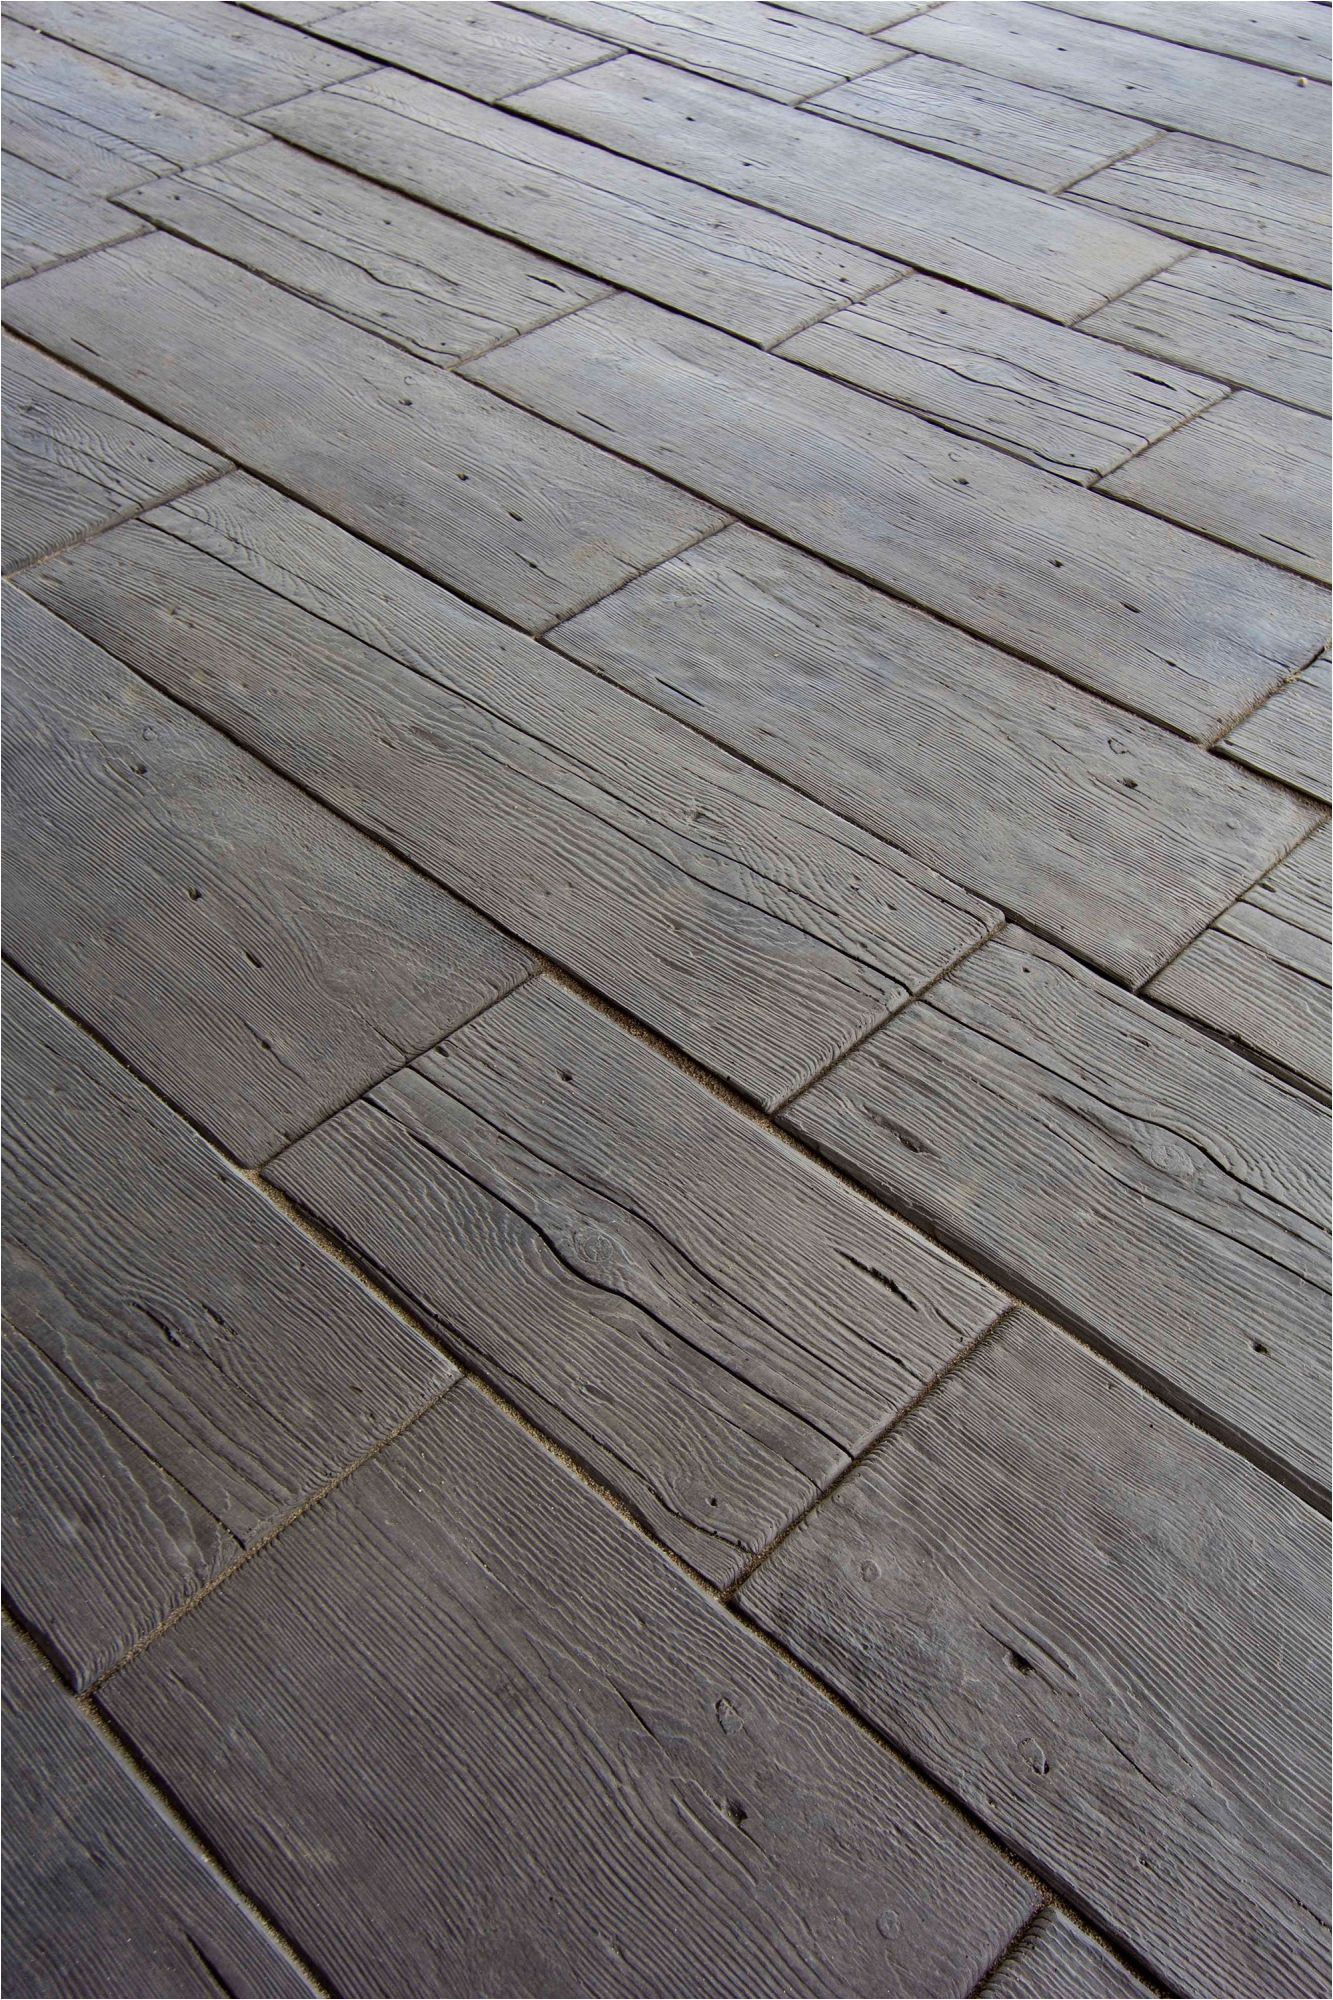 nope 2 thick concrete pavers barn plank landscape tile by silver creek stoneworks rochester mn ideal for outdoor paths decks etc